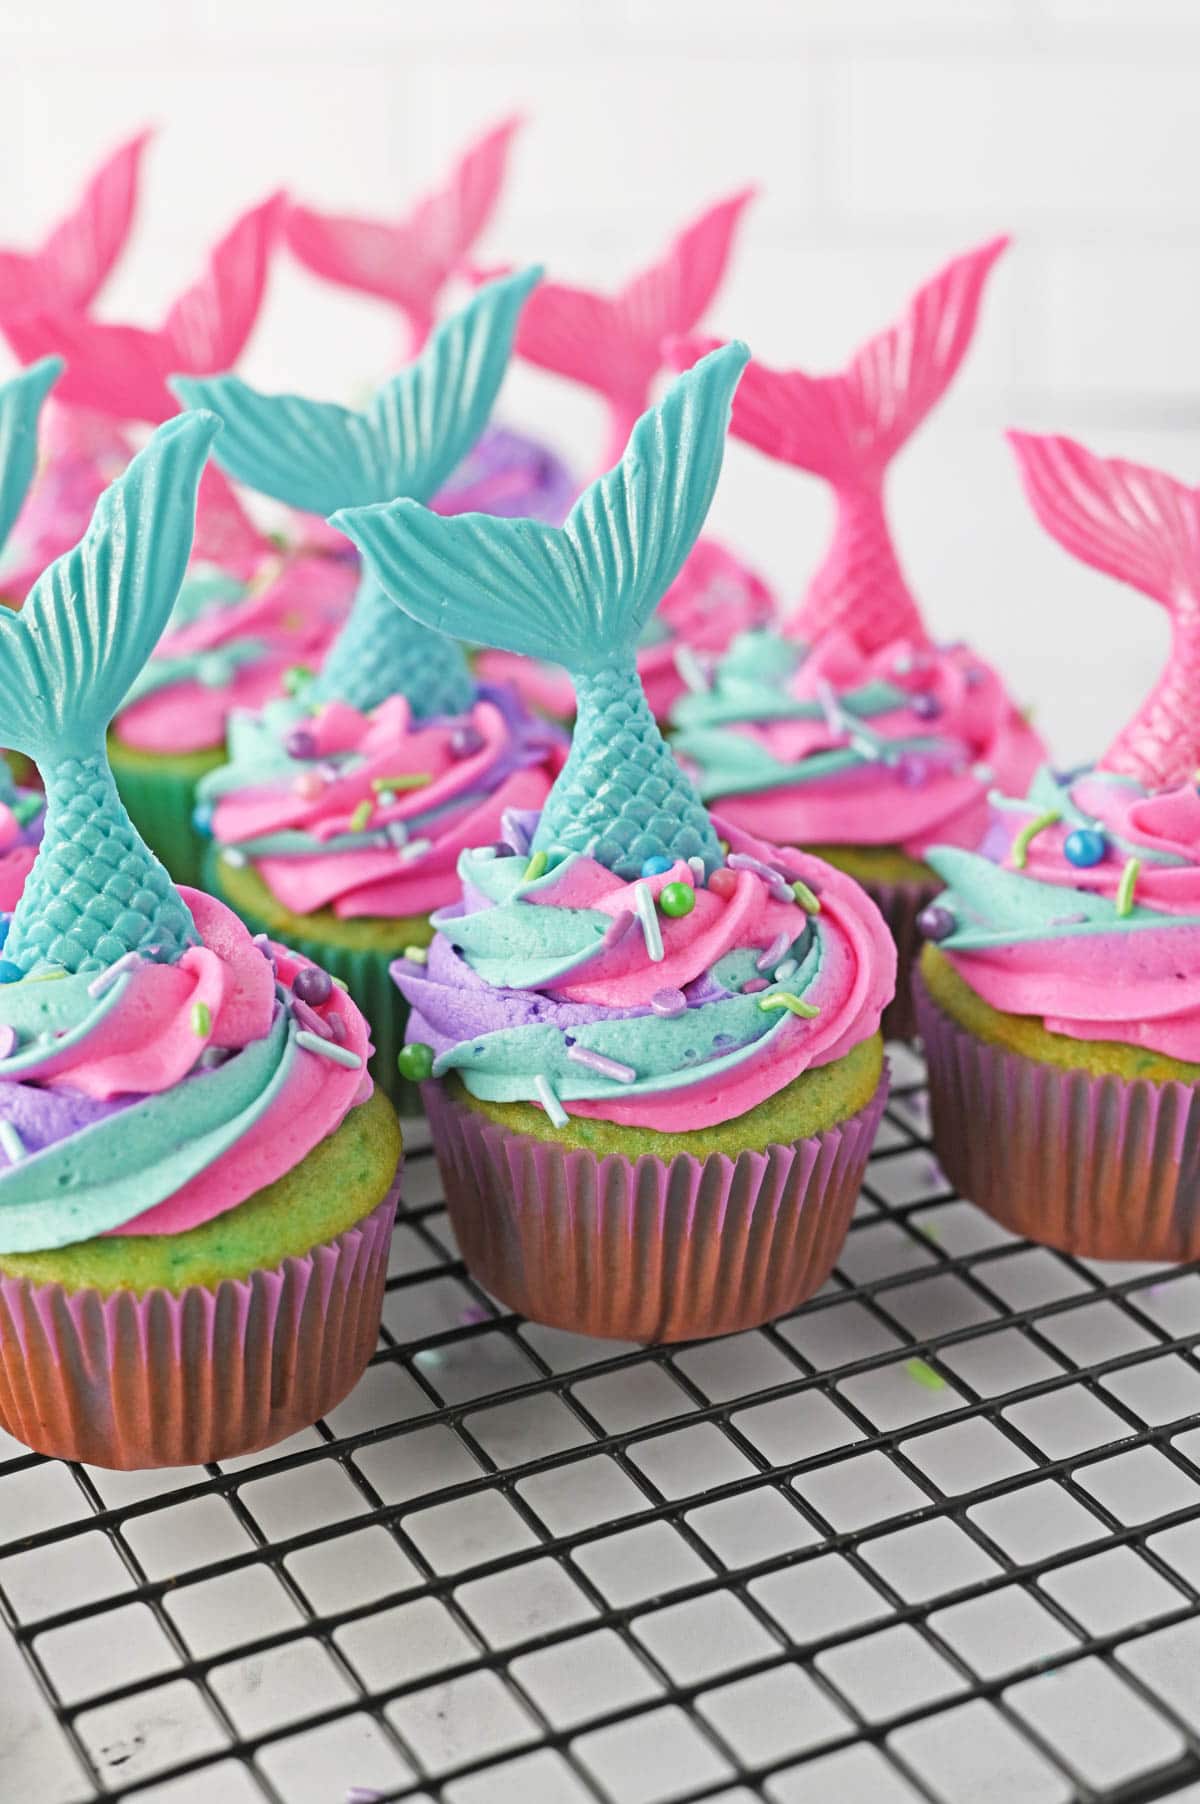 Cupcakes with mermaid sprinkles and mermaid tails sticking out the top